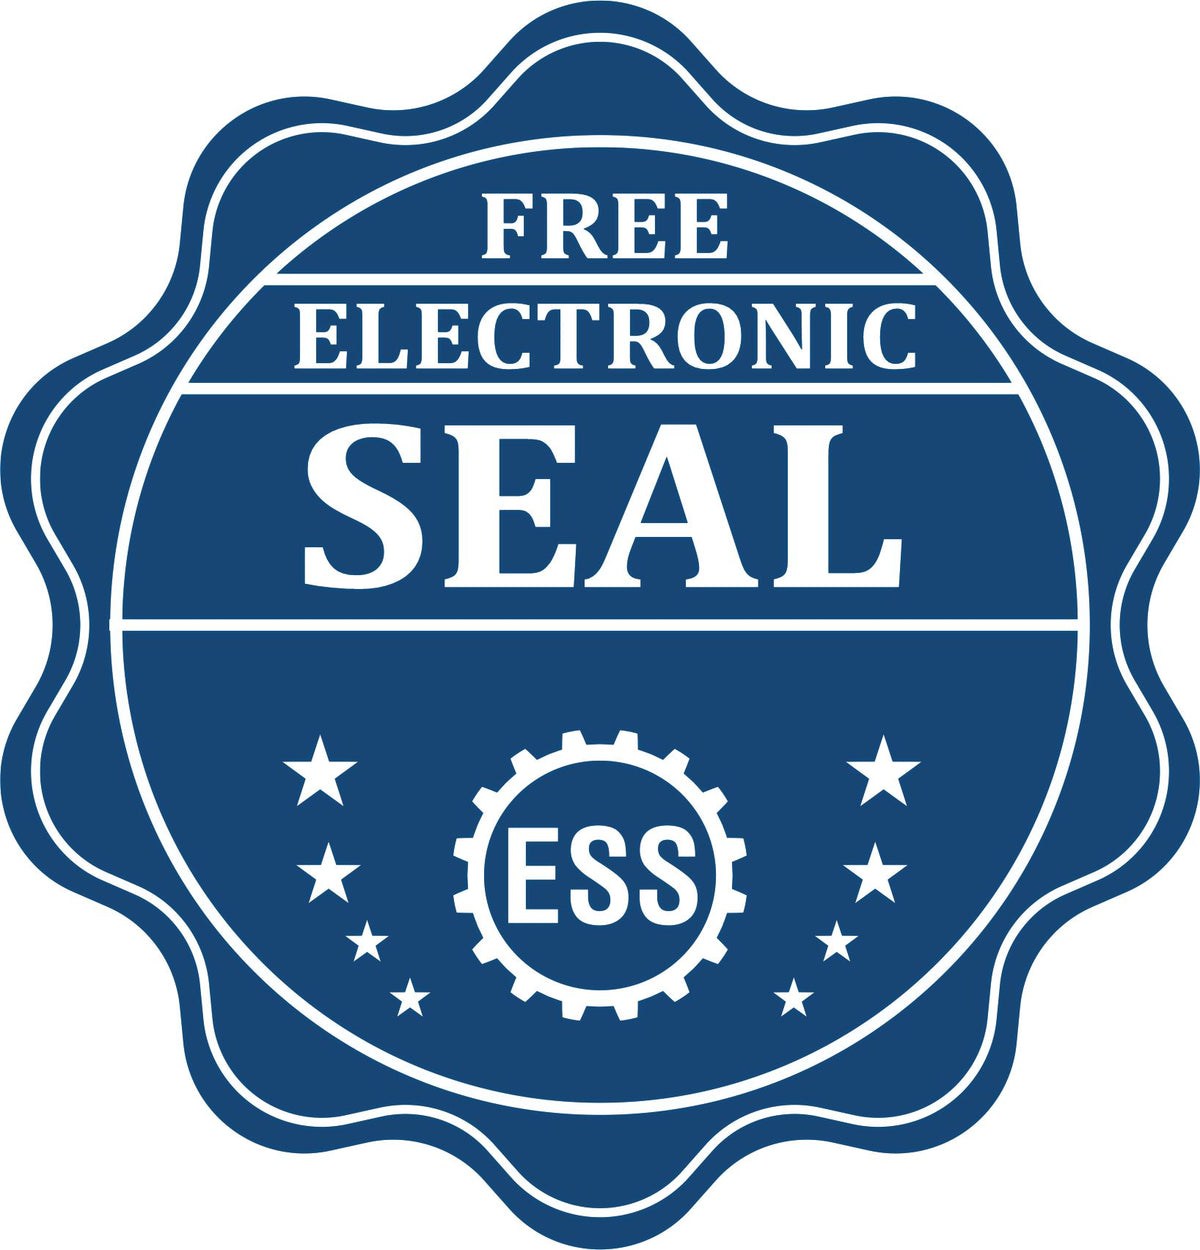 A badge showing a free electronic seal for the Gift Colorado Architect Seal with stars and the ESS gear on the emblem.